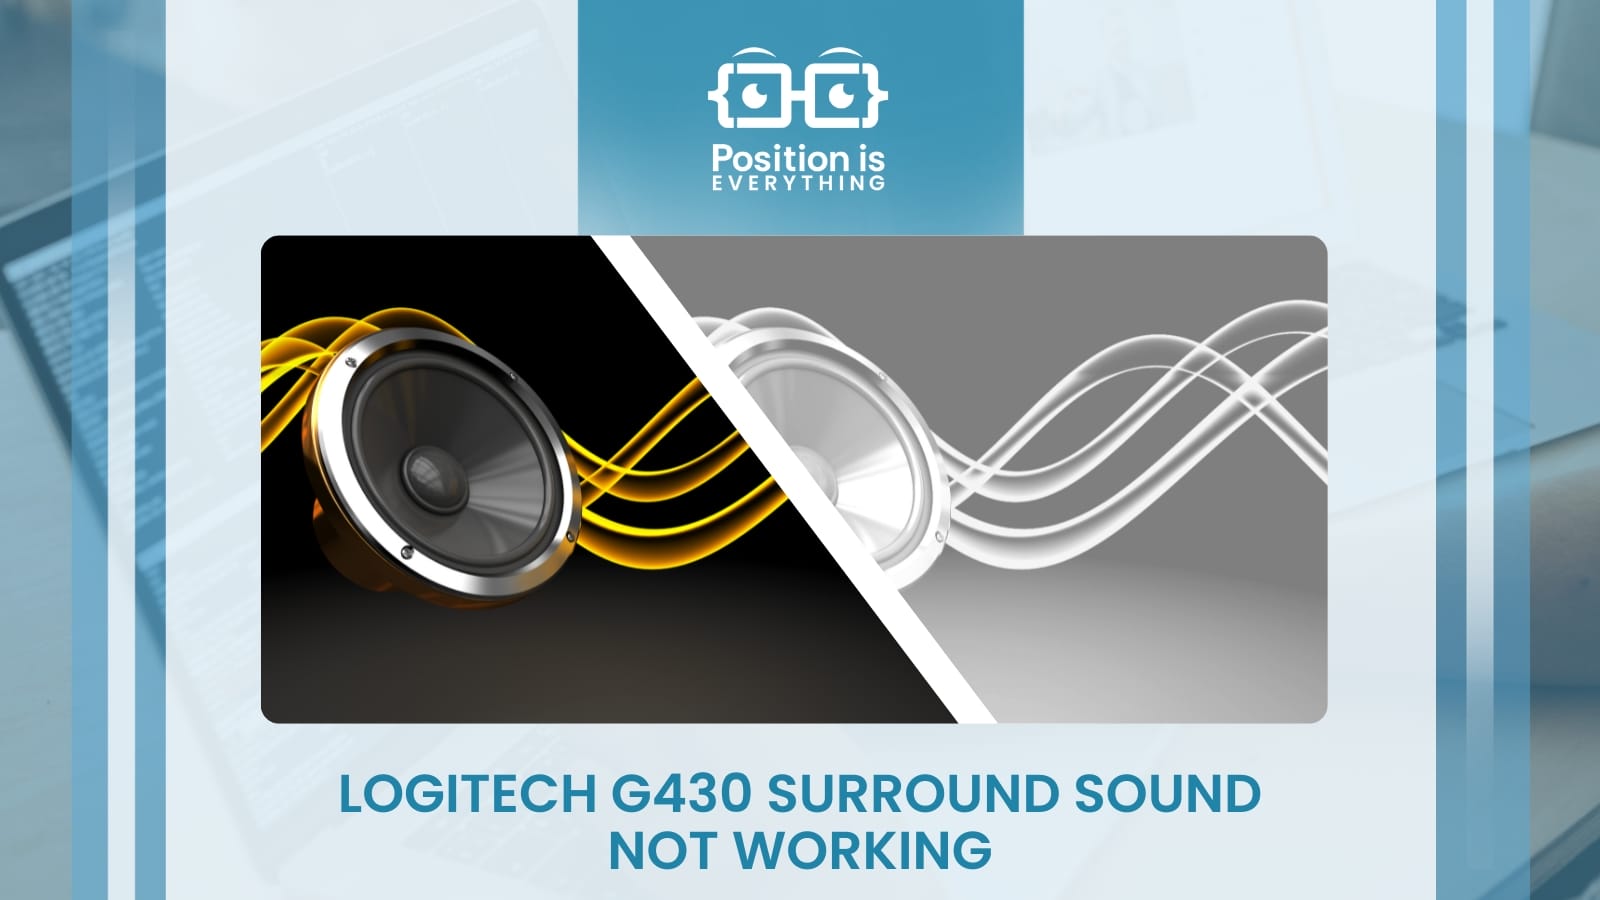 værksted teori Watt Logitech G430 Surround Sound Not Working: Fixes for Common Problems